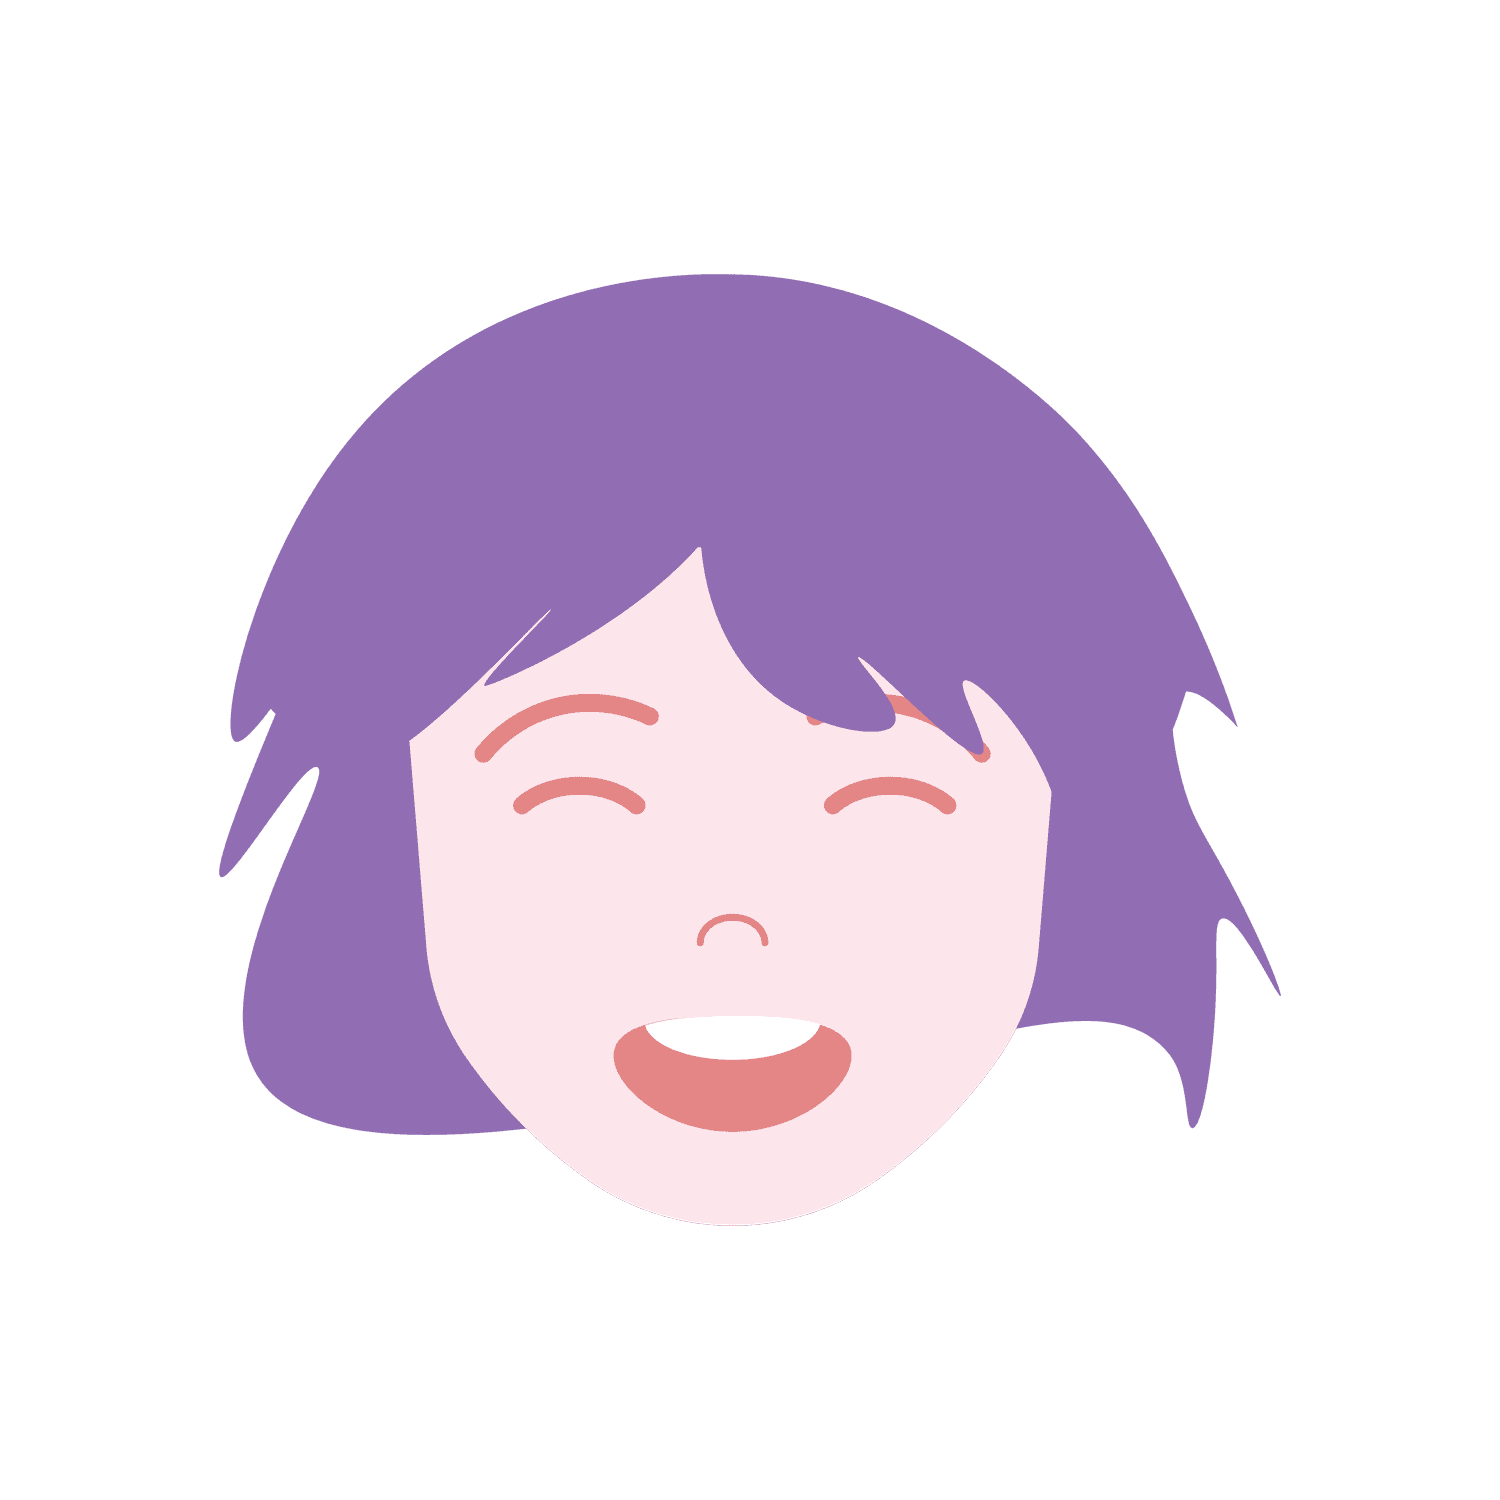 classic colorful avatar funny face character illustration